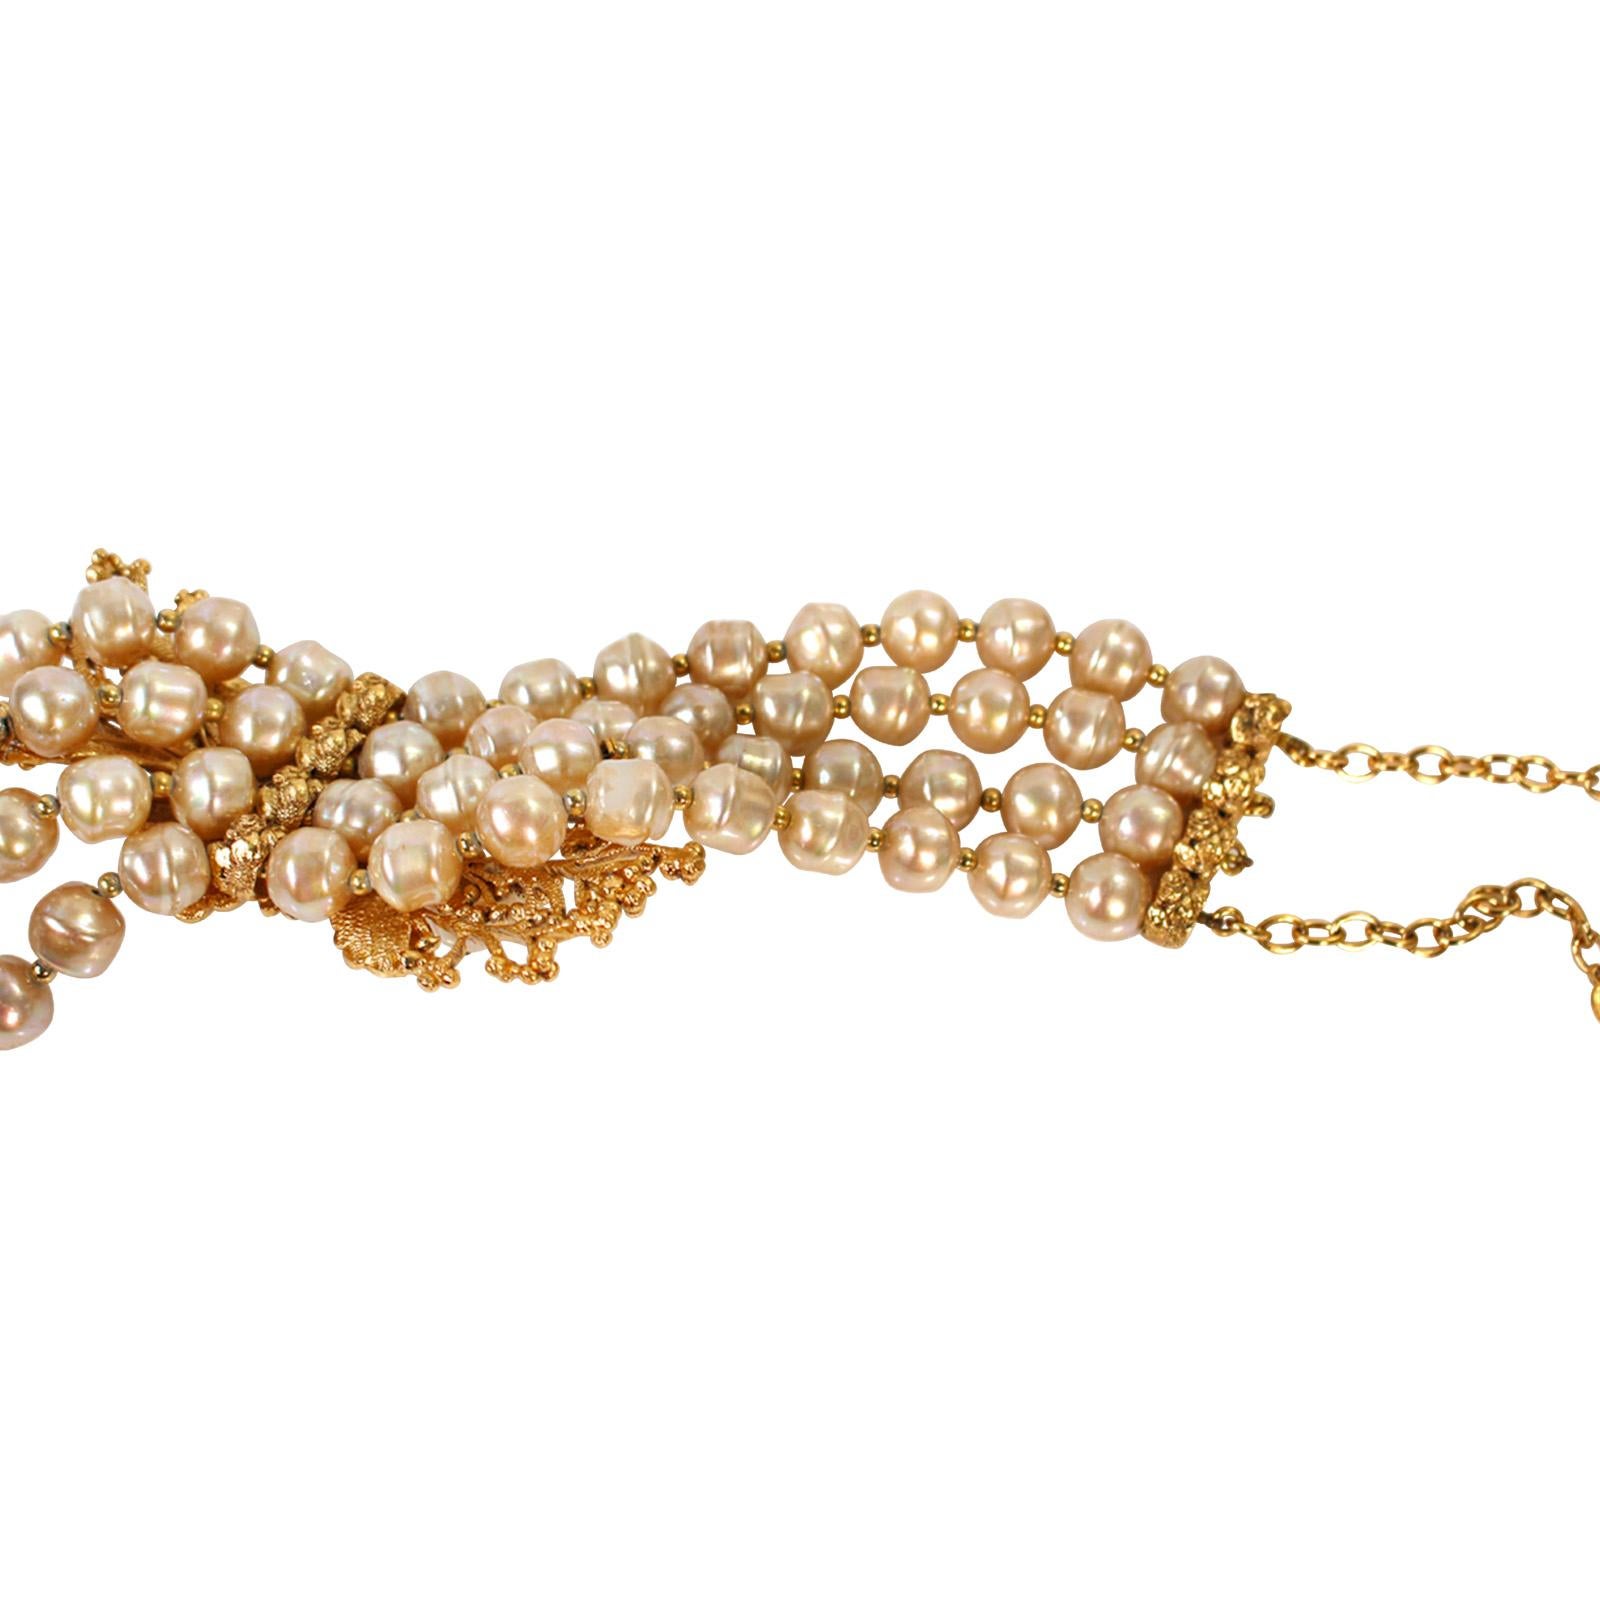 Vintage Christian Dior  Couture Gold Tone and Pearl Necklace Circa 1980s For Sale 3